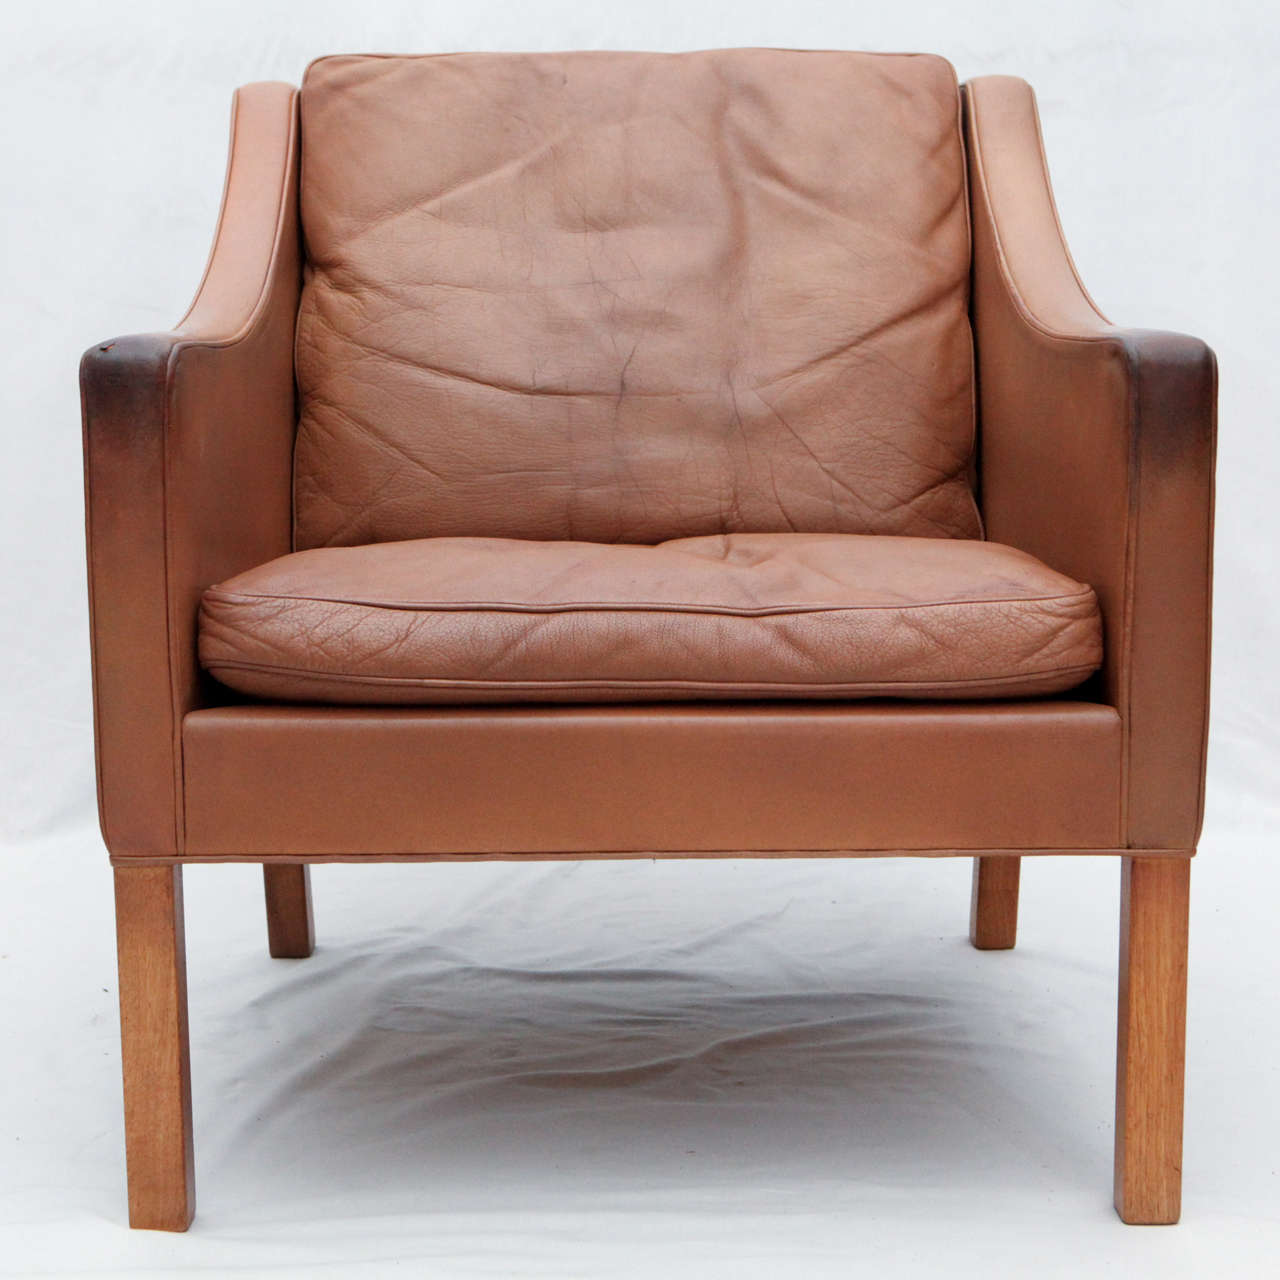 Borge Mogensen leather lounge chair designed in 1963 and produced by Frederica.